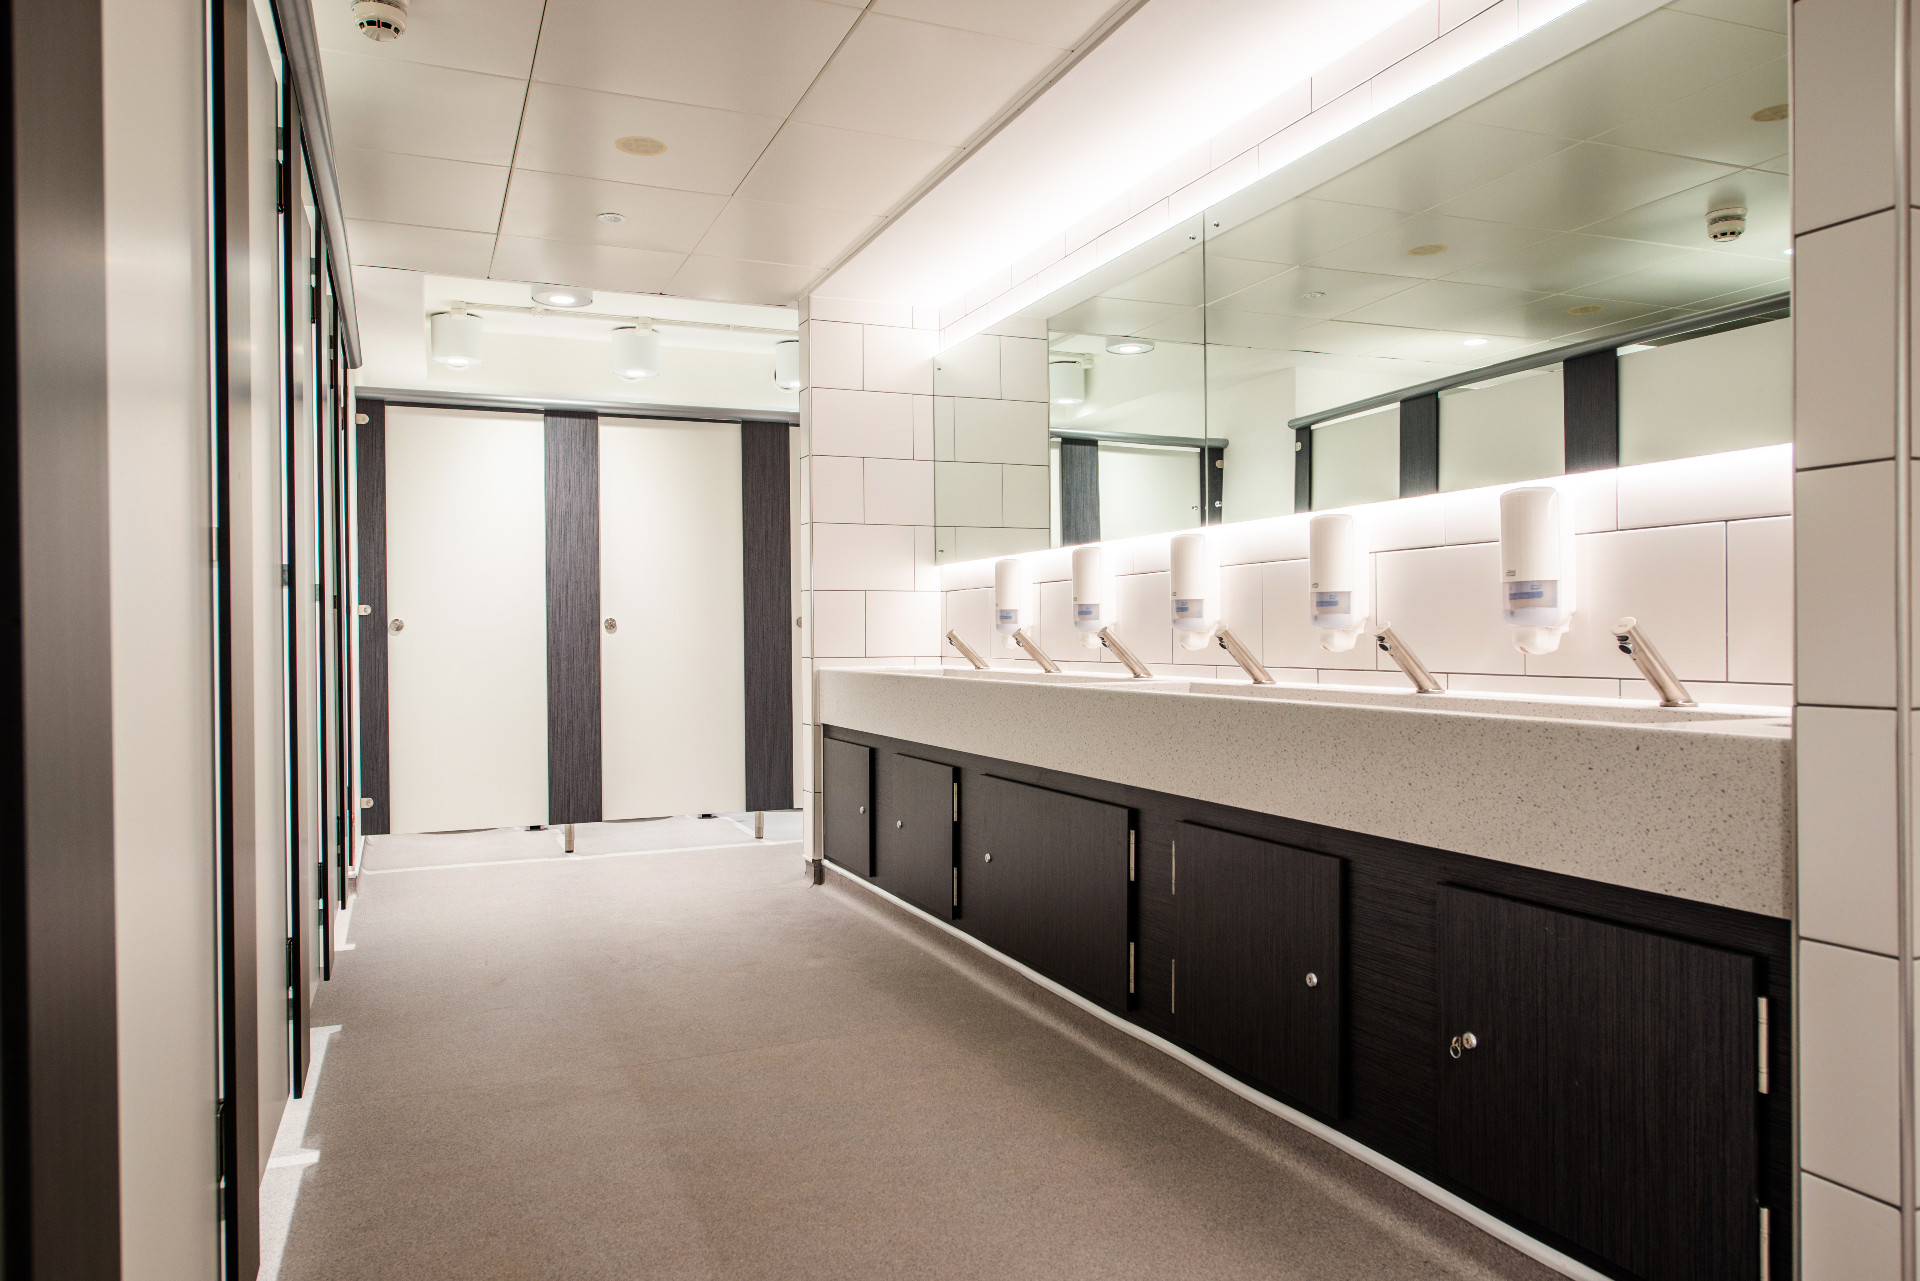 Row of basin and toilet cubicles with lighting and mirrors.